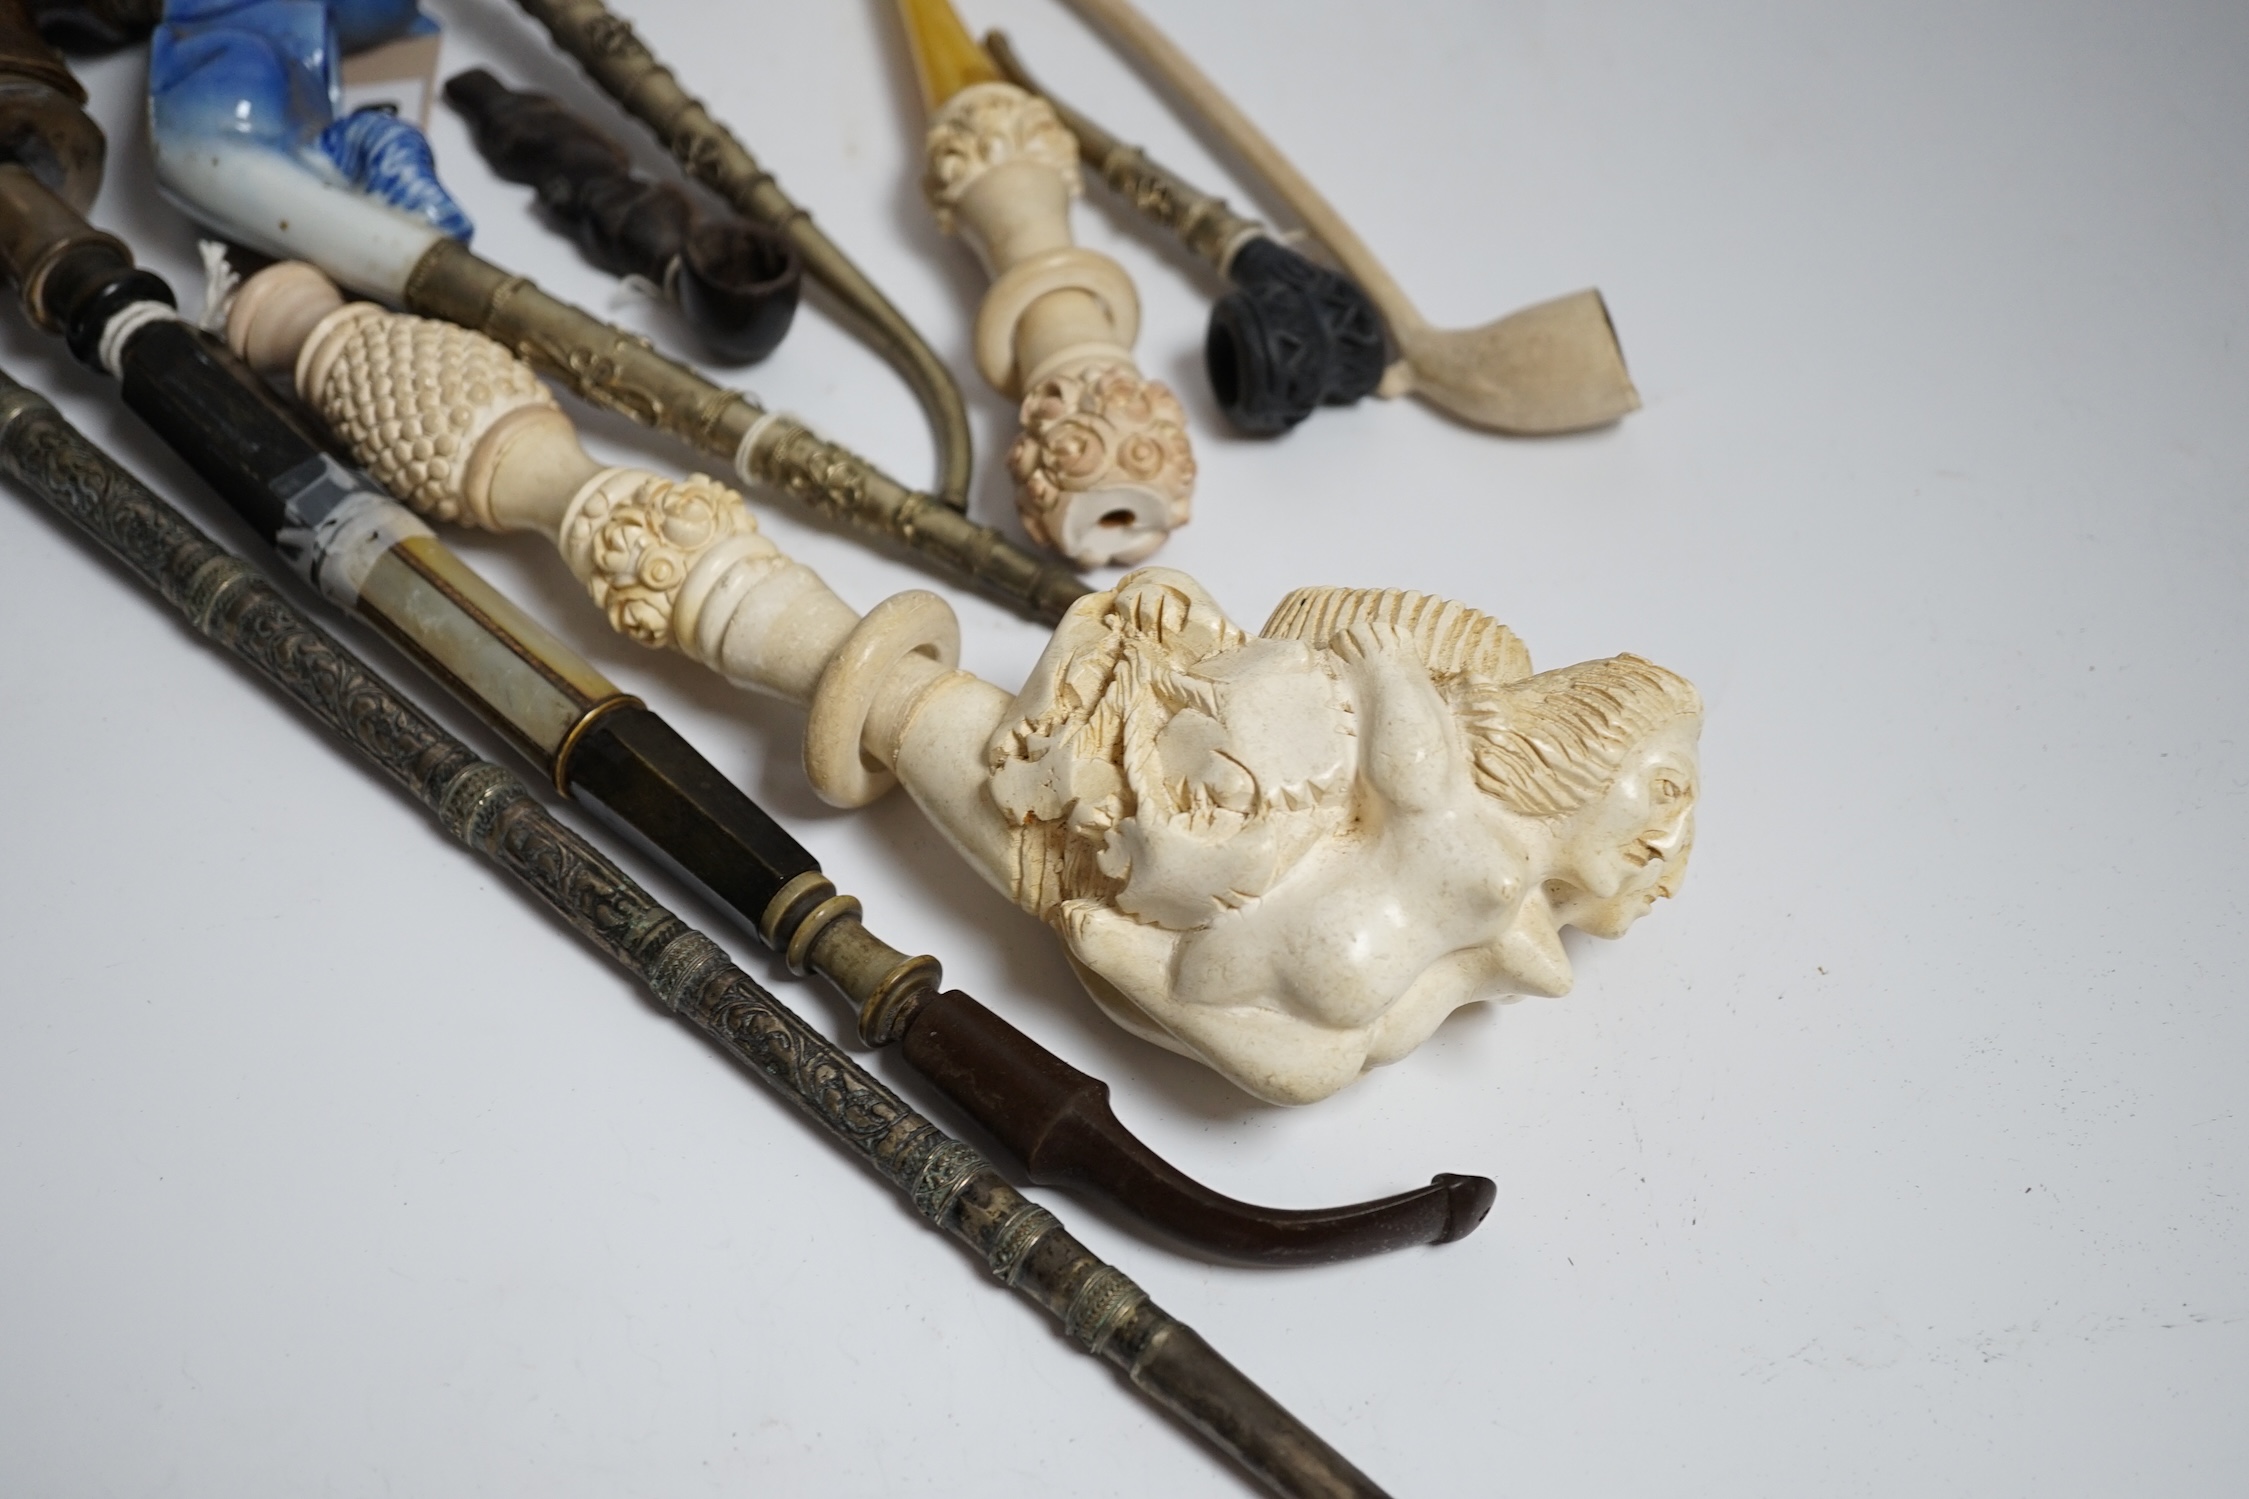 A quantity of various pipes including Meerschaum